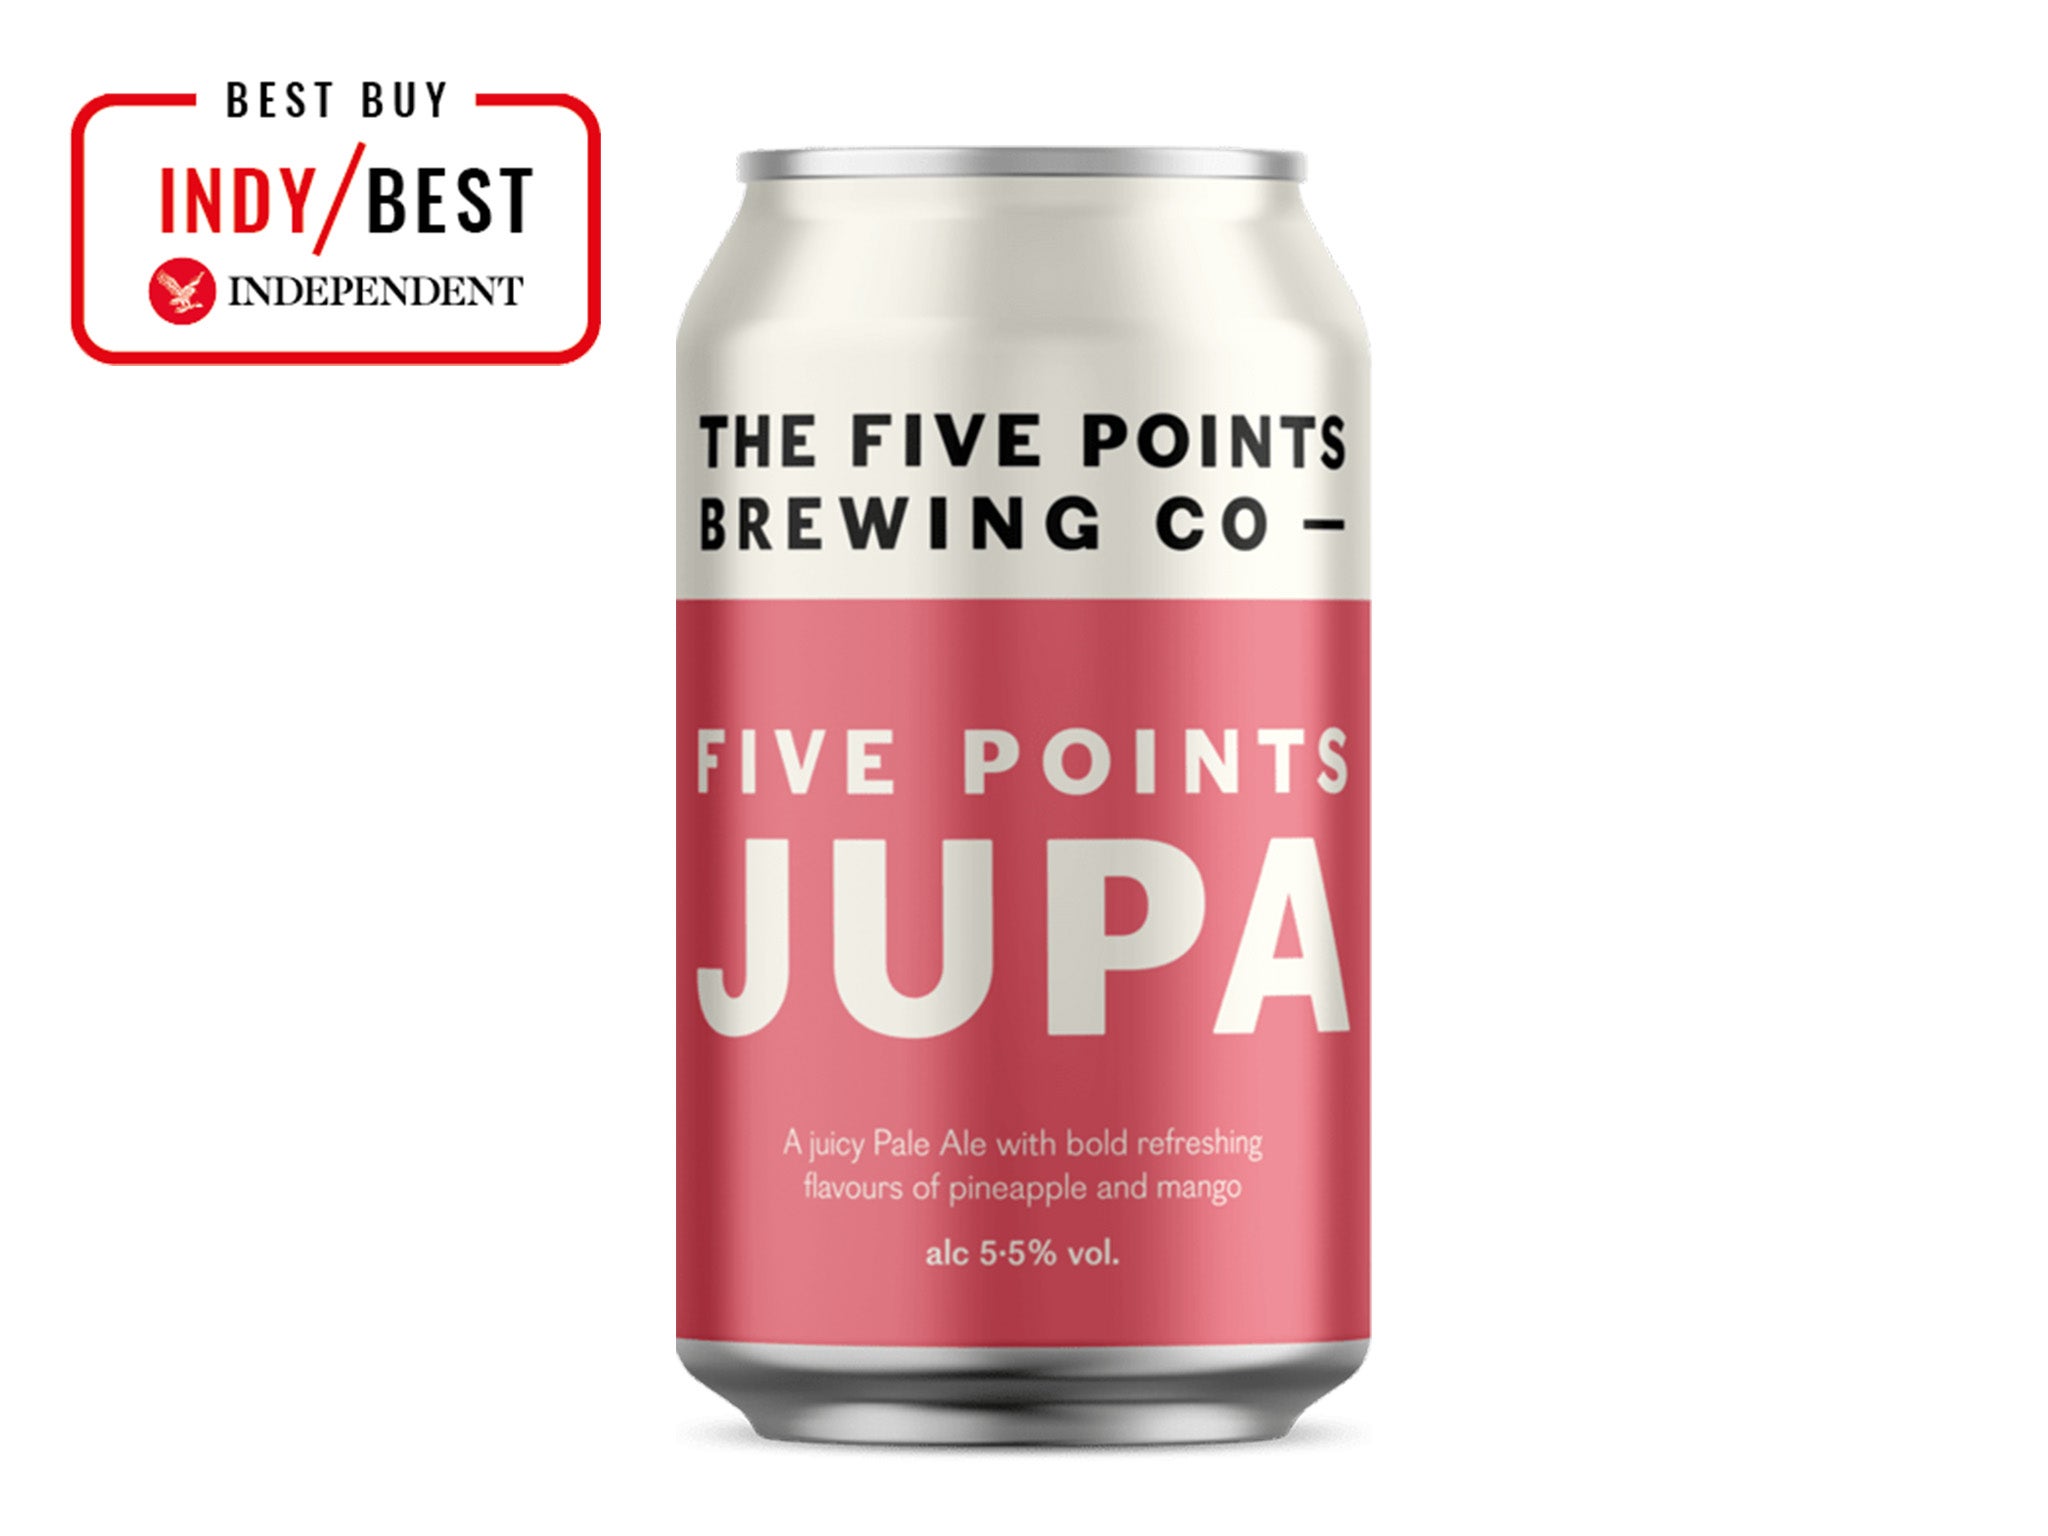 Five Points Brewing Co jupa, 5.5%